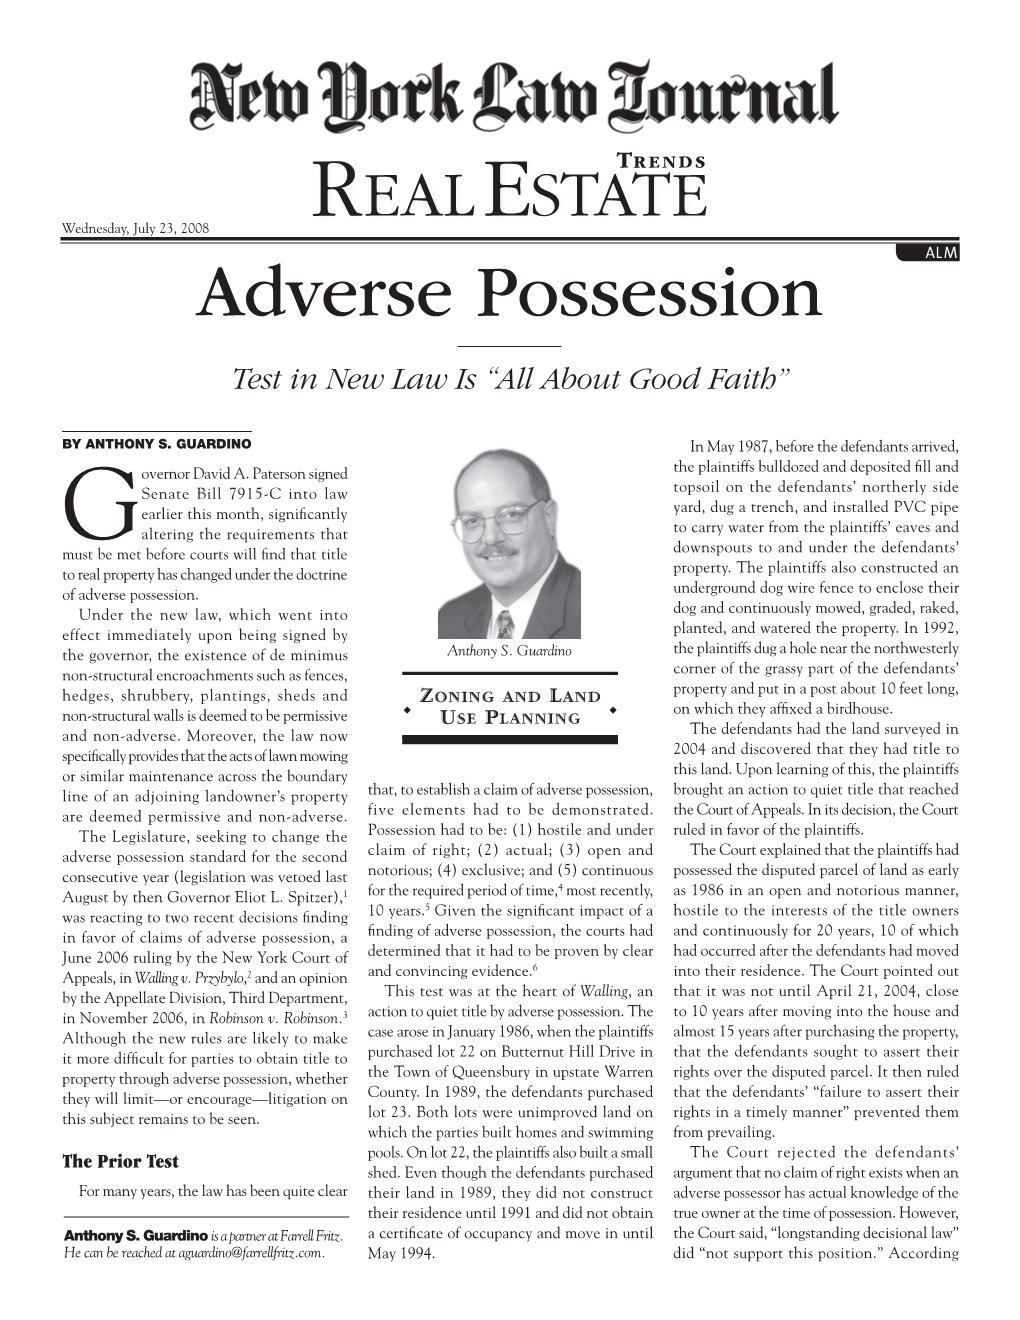 Adverse Possession Test in New Law Is “All About Good Faith”